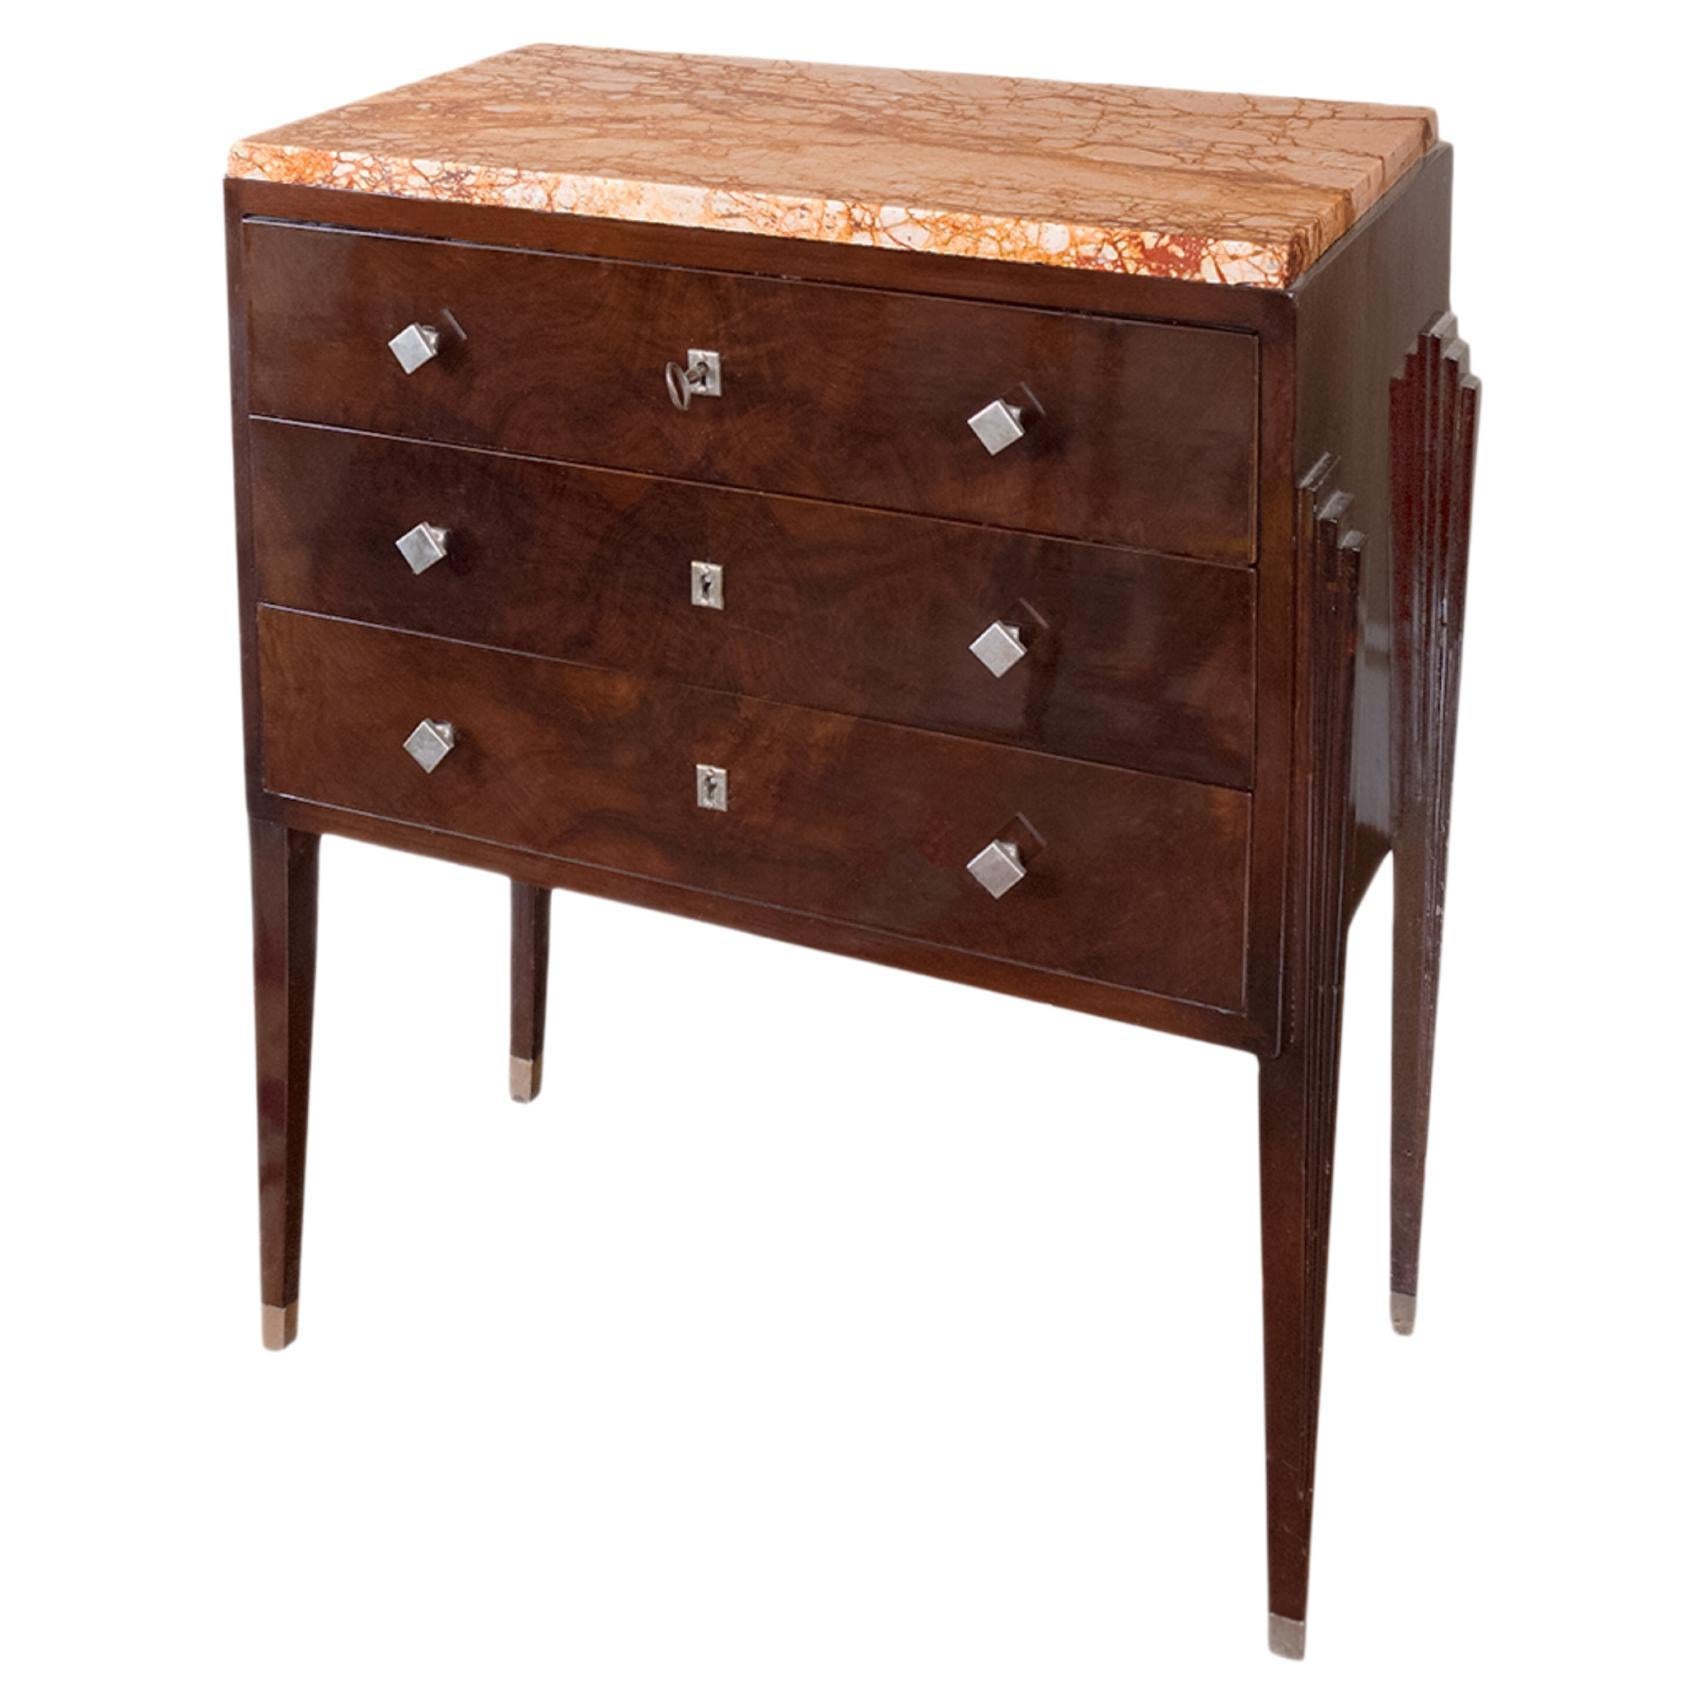 Magnificent three-drawer commode with a lacquered finish and chrome hardware. A sophisticated piece made from rare red Verona marble that was quarried in Verona, Italy. Excellent as a dining, living, or bedroom side table.